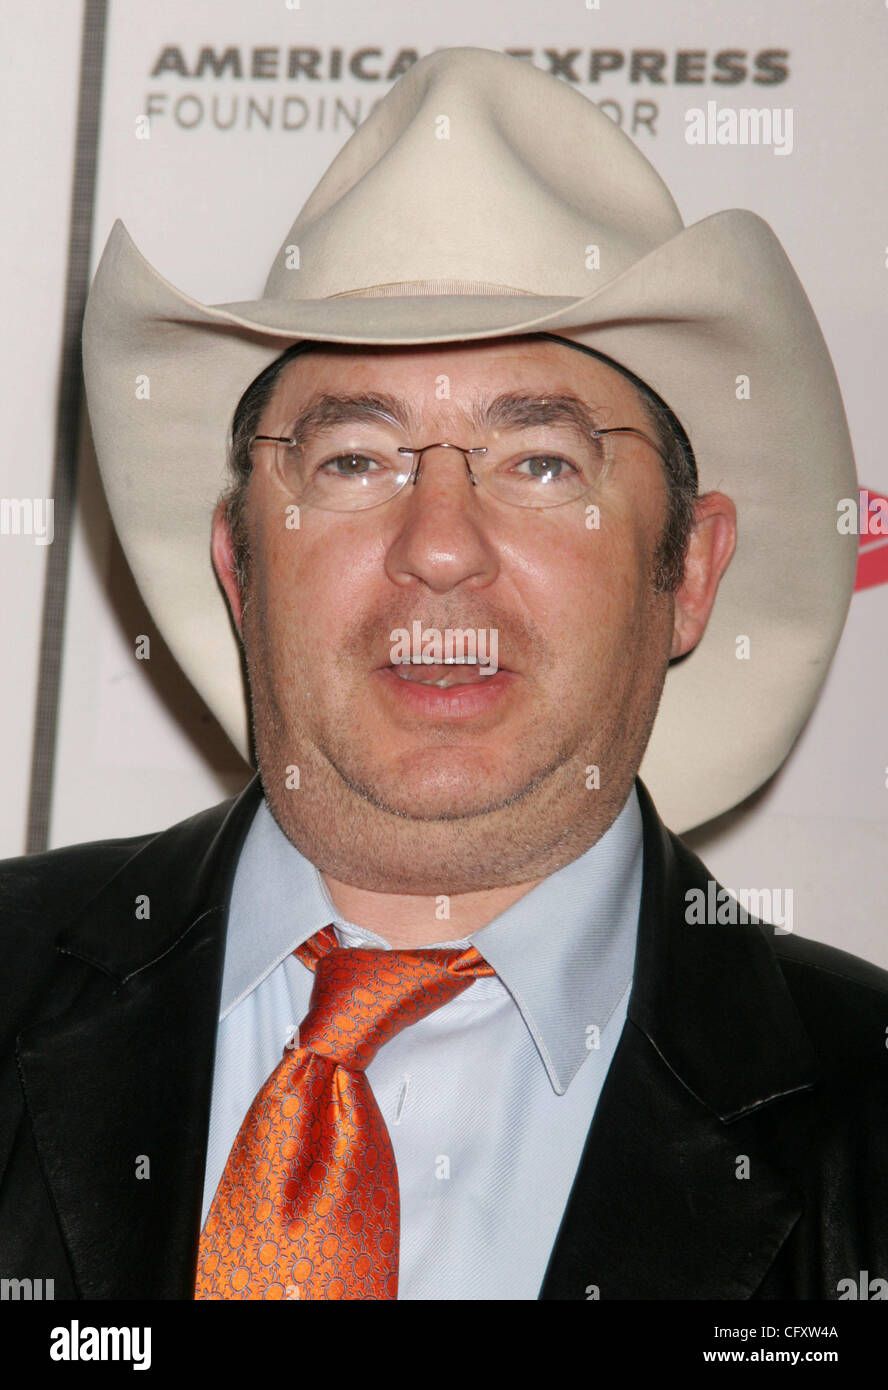 Apr 27, 2007 - New York, NY, USA - Director BARRY SONNENFELD  at the arrivals of New York premiere 'The Grand' during the Tribeca Film Festival at the Tribeca Performing Arts Center. (Credit Image: © Nancy Kaszerman/ZUMA Press) Stock Photo